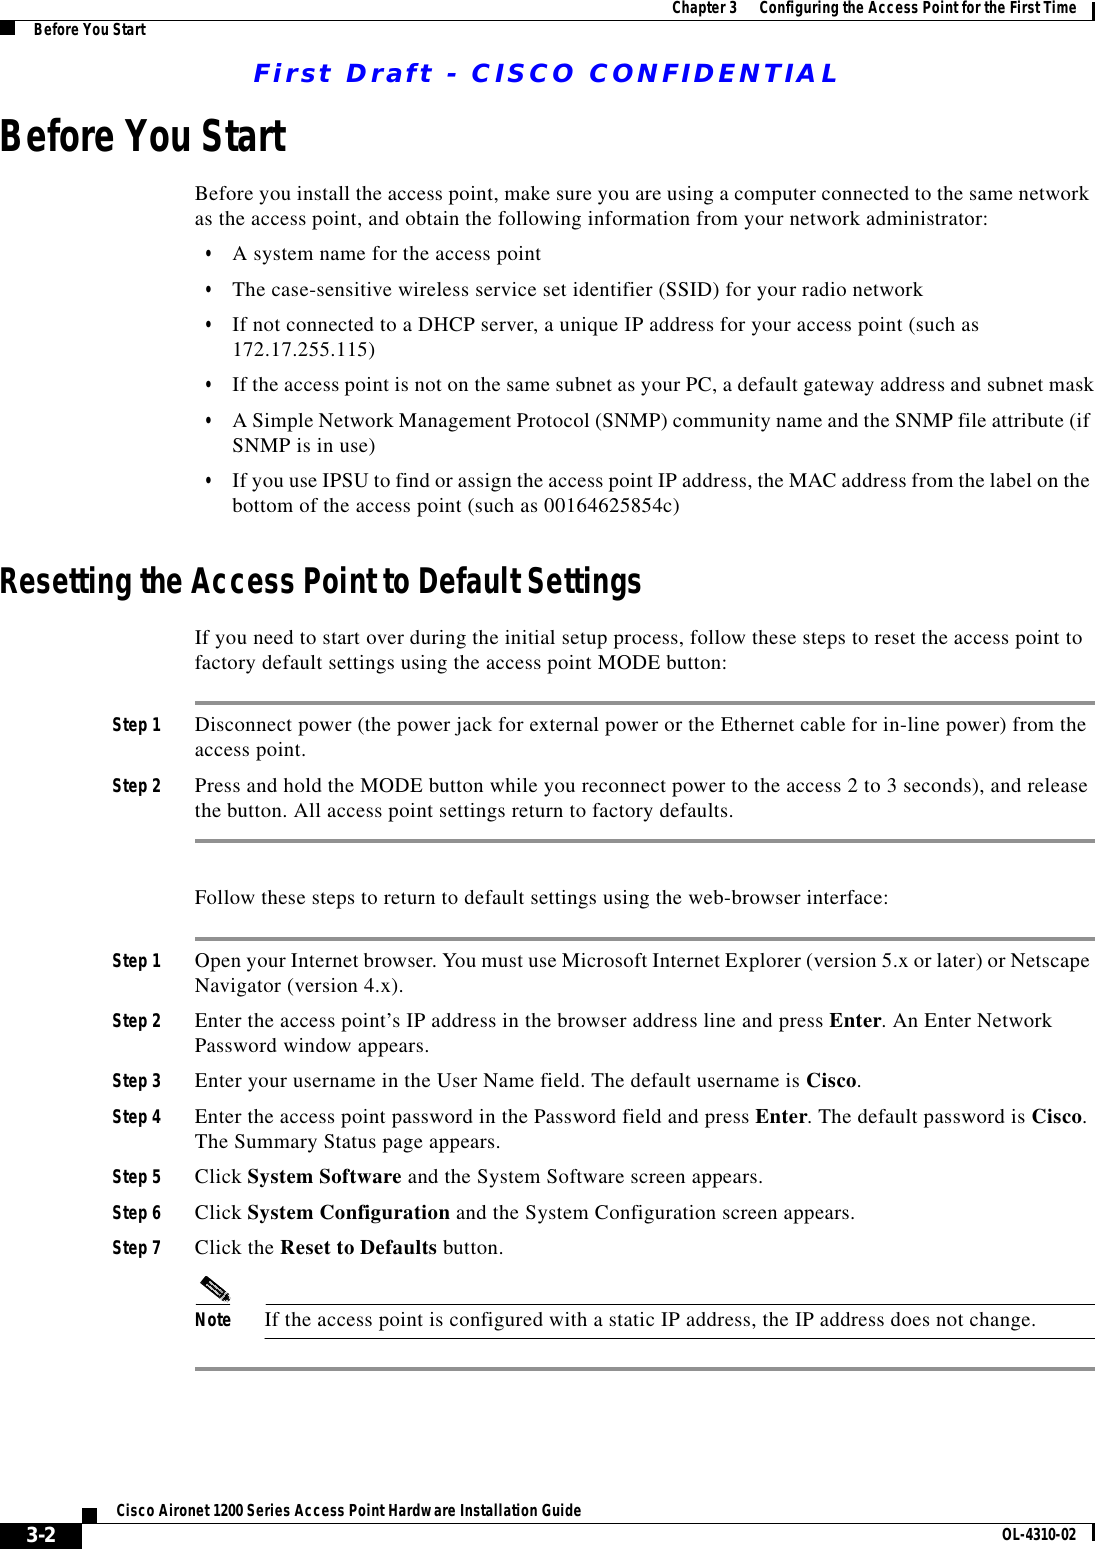 First Draft - CISCO CONFIDENTIAL3-2Cisco Aironet 1200 Series Access Point Hardware Installation Guide OL-4310-02Chapter 3      Configuring the Access Point for the First TimeBefore You StartBefore You StartBefore you install the access point, make sure you are using a computer connected to the same network as the access point, and obtain the following information from your network administrator:•A system name for the access point•The case-sensitive wireless service set identifier (SSID) for your radio network•If not connected to a DHCP server, a unique IP address for your access point (such as 172.17.255.115)•If the access point is not on the same subnet as your PC, a default gateway address and subnet mask•A Simple Network Management Protocol (SNMP) community name and the SNMP file attribute (if SNMP is in use)•If you use IPSU to find or assign the access point IP address, the MAC address from the label on the bottom of the access point (such as 00164625854c)Resetting the Access Point to Default SettingsIf you need to start over during the initial setup process, follow these steps to reset the access point to factory default settings using the access point MODE button:Step 1 Disconnect power (the power jack for external power or the Ethernet cable for in-line power) from the access point.Step 2 Press and hold the MODE button while you reconnect power to the access 2 to 3 seconds), and release the button. All access point settings return to factory defaults.Follow these steps to return to default settings using the web-browser interface:Step 1 Open your Internet browser. You must use Microsoft Internet Explorer (version 5.x or later) or Netscape Navigator (version 4.x).Step 2 Enter the access point’s IP address in the browser address line and press Enter. An Enter Network Password window appears.Step 3 Enter your username in the User Name field. The default username is Cisco.Step 4 Enter the access point password in the Password field and press Enter. The default password is Cisco. The Summary Status page appears.Step 5 Click System Software and the System Software screen appears.Step 6 Click System Configuration and the System Configuration screen appears.Step 7 Click the Reset to Defaults button.Note If the access point is configured with a static IP address, the IP address does not change.